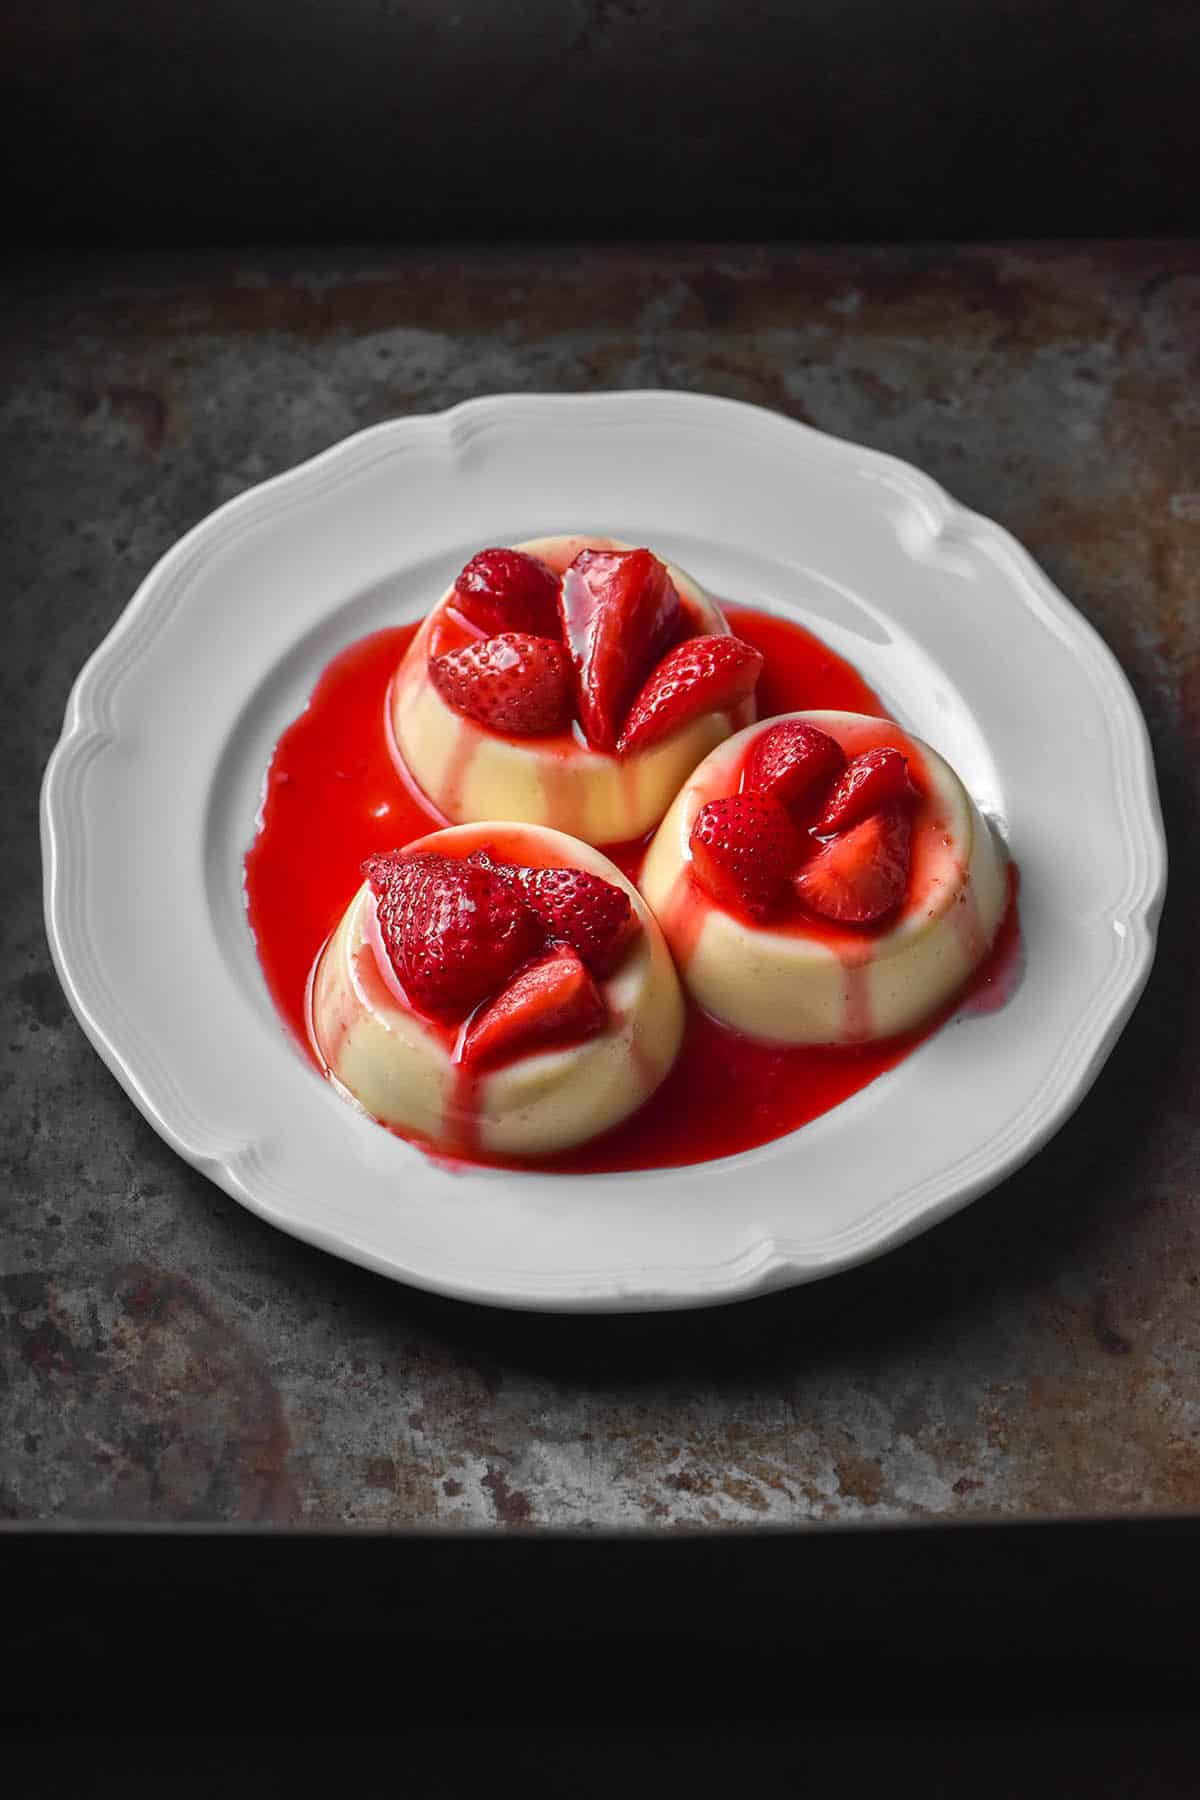 Three white chocolate panna cotta topped with strawberry coulis on a white scalloped plate atop a dark steel backdrop